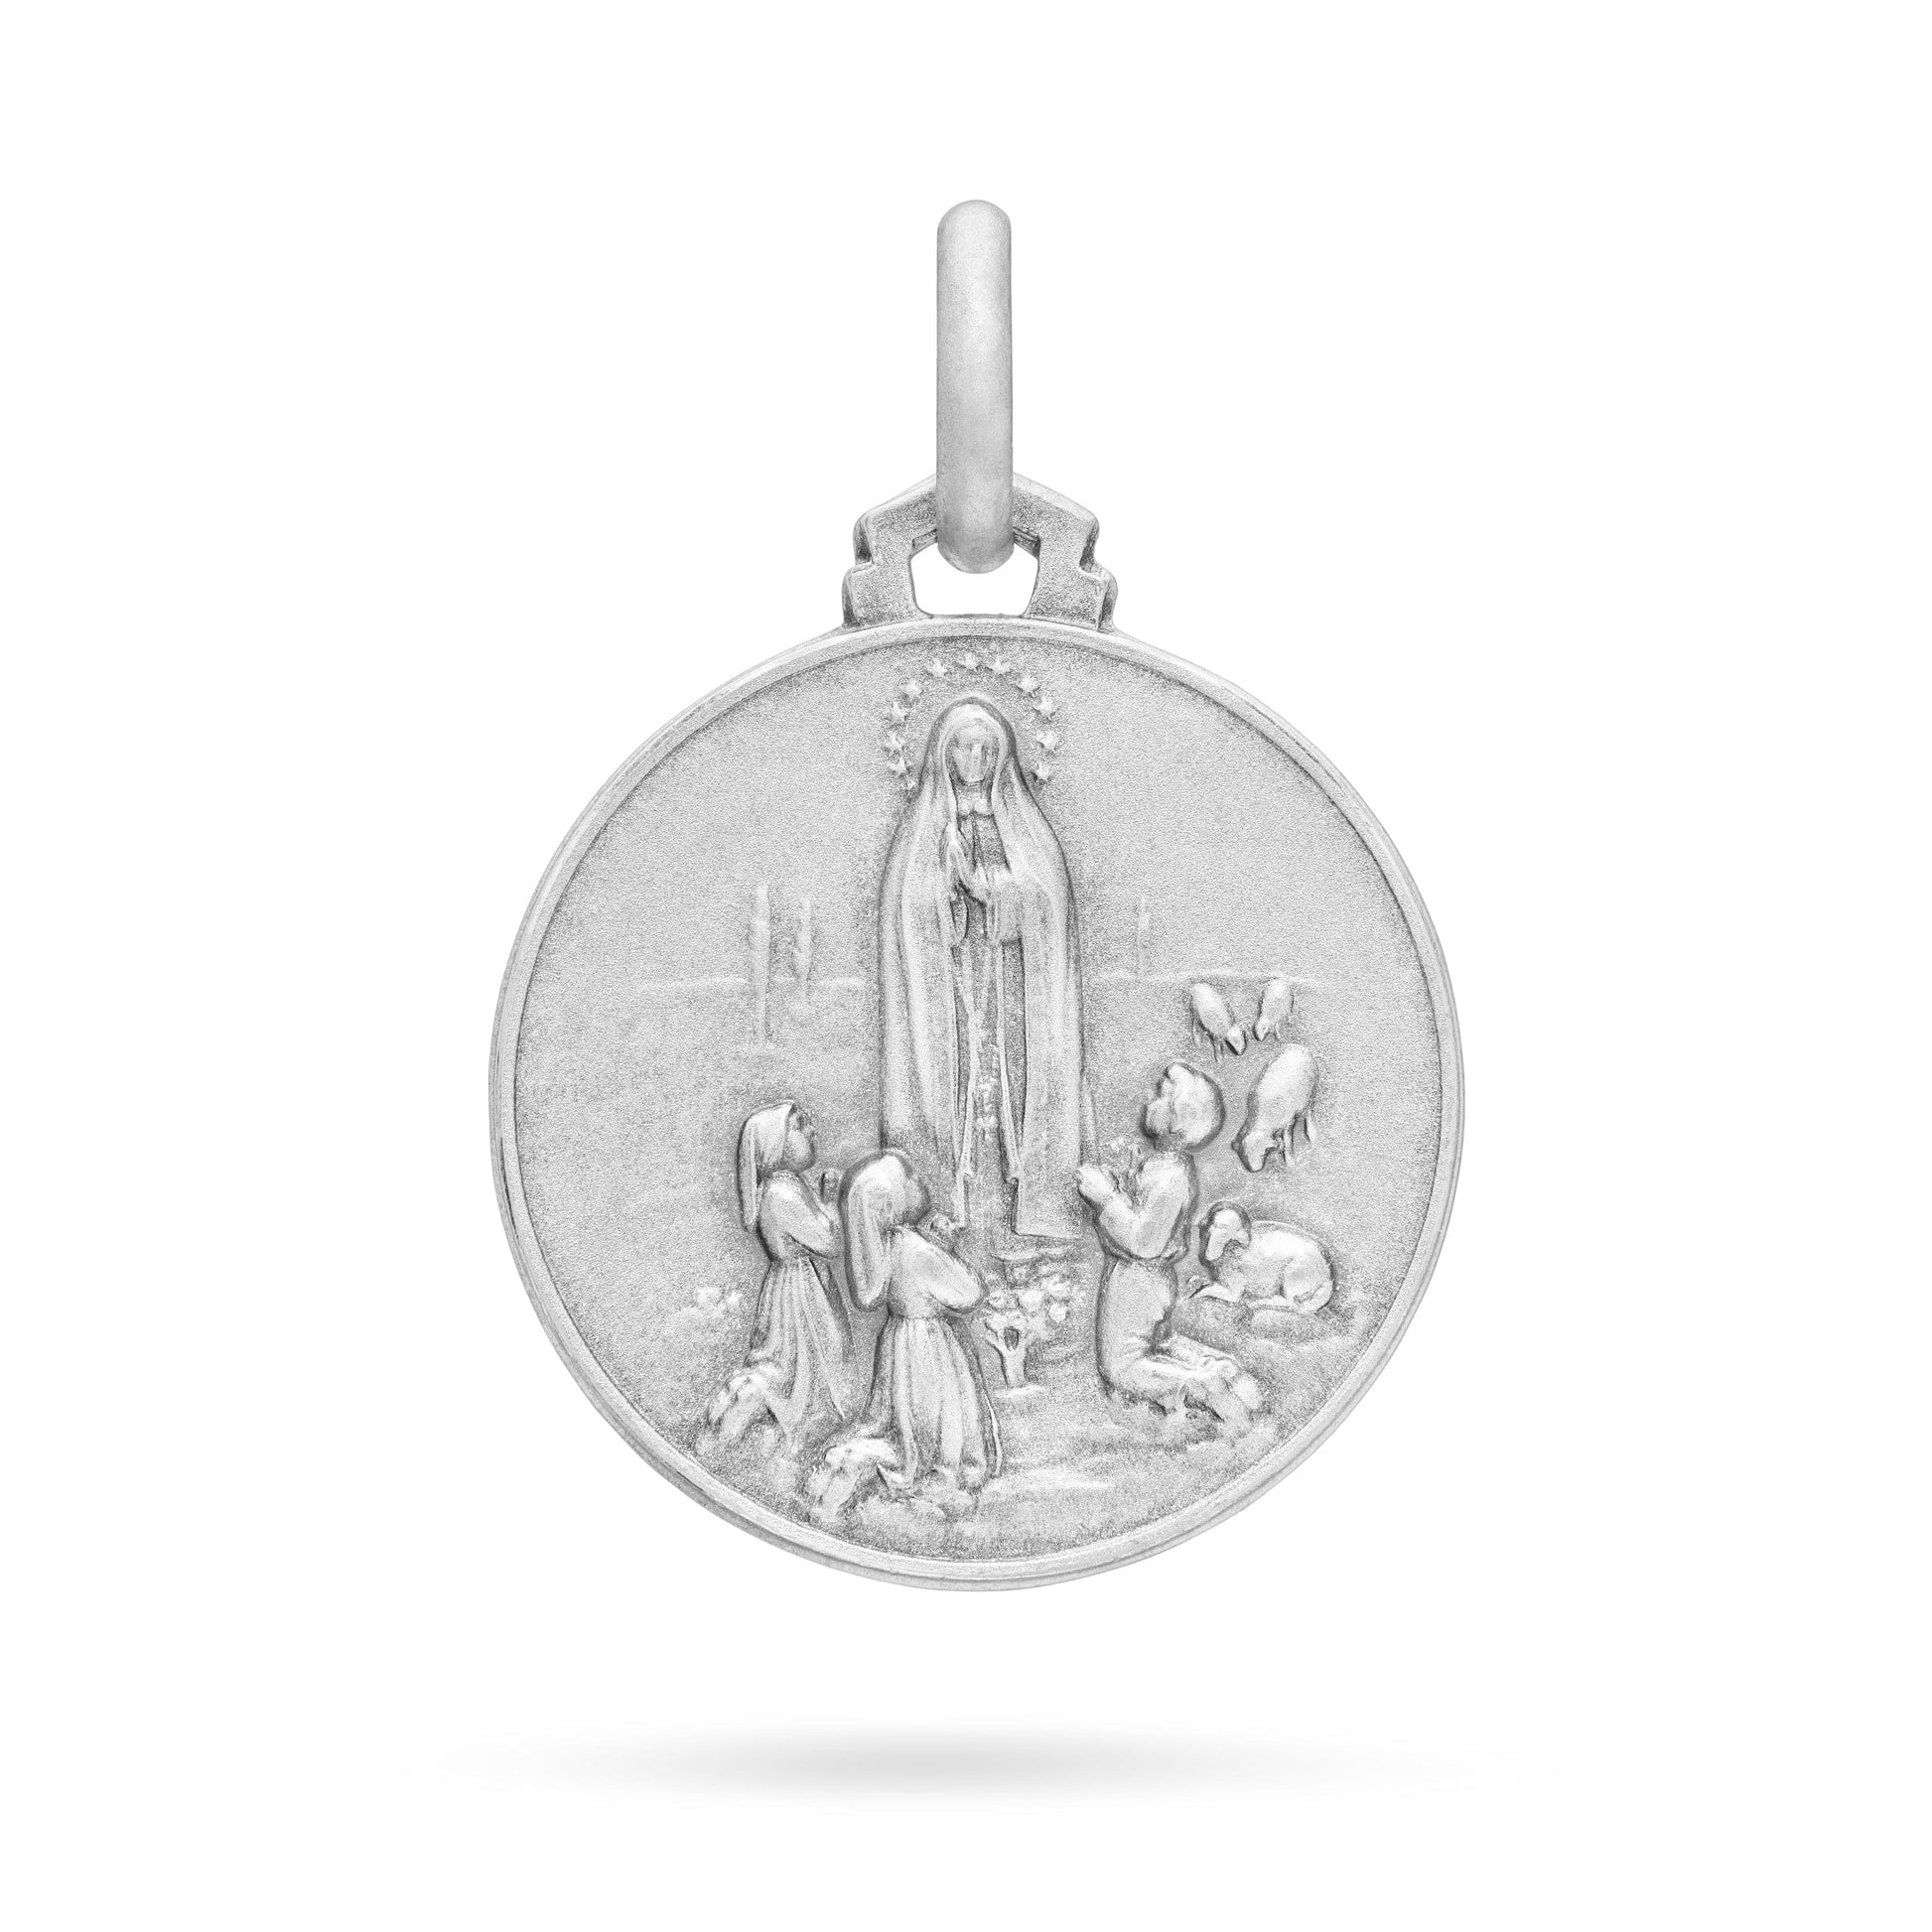 MONDO CATTOLICO Medal 18 mm (0.70 in) Silver medal of Our Lady of Fatima